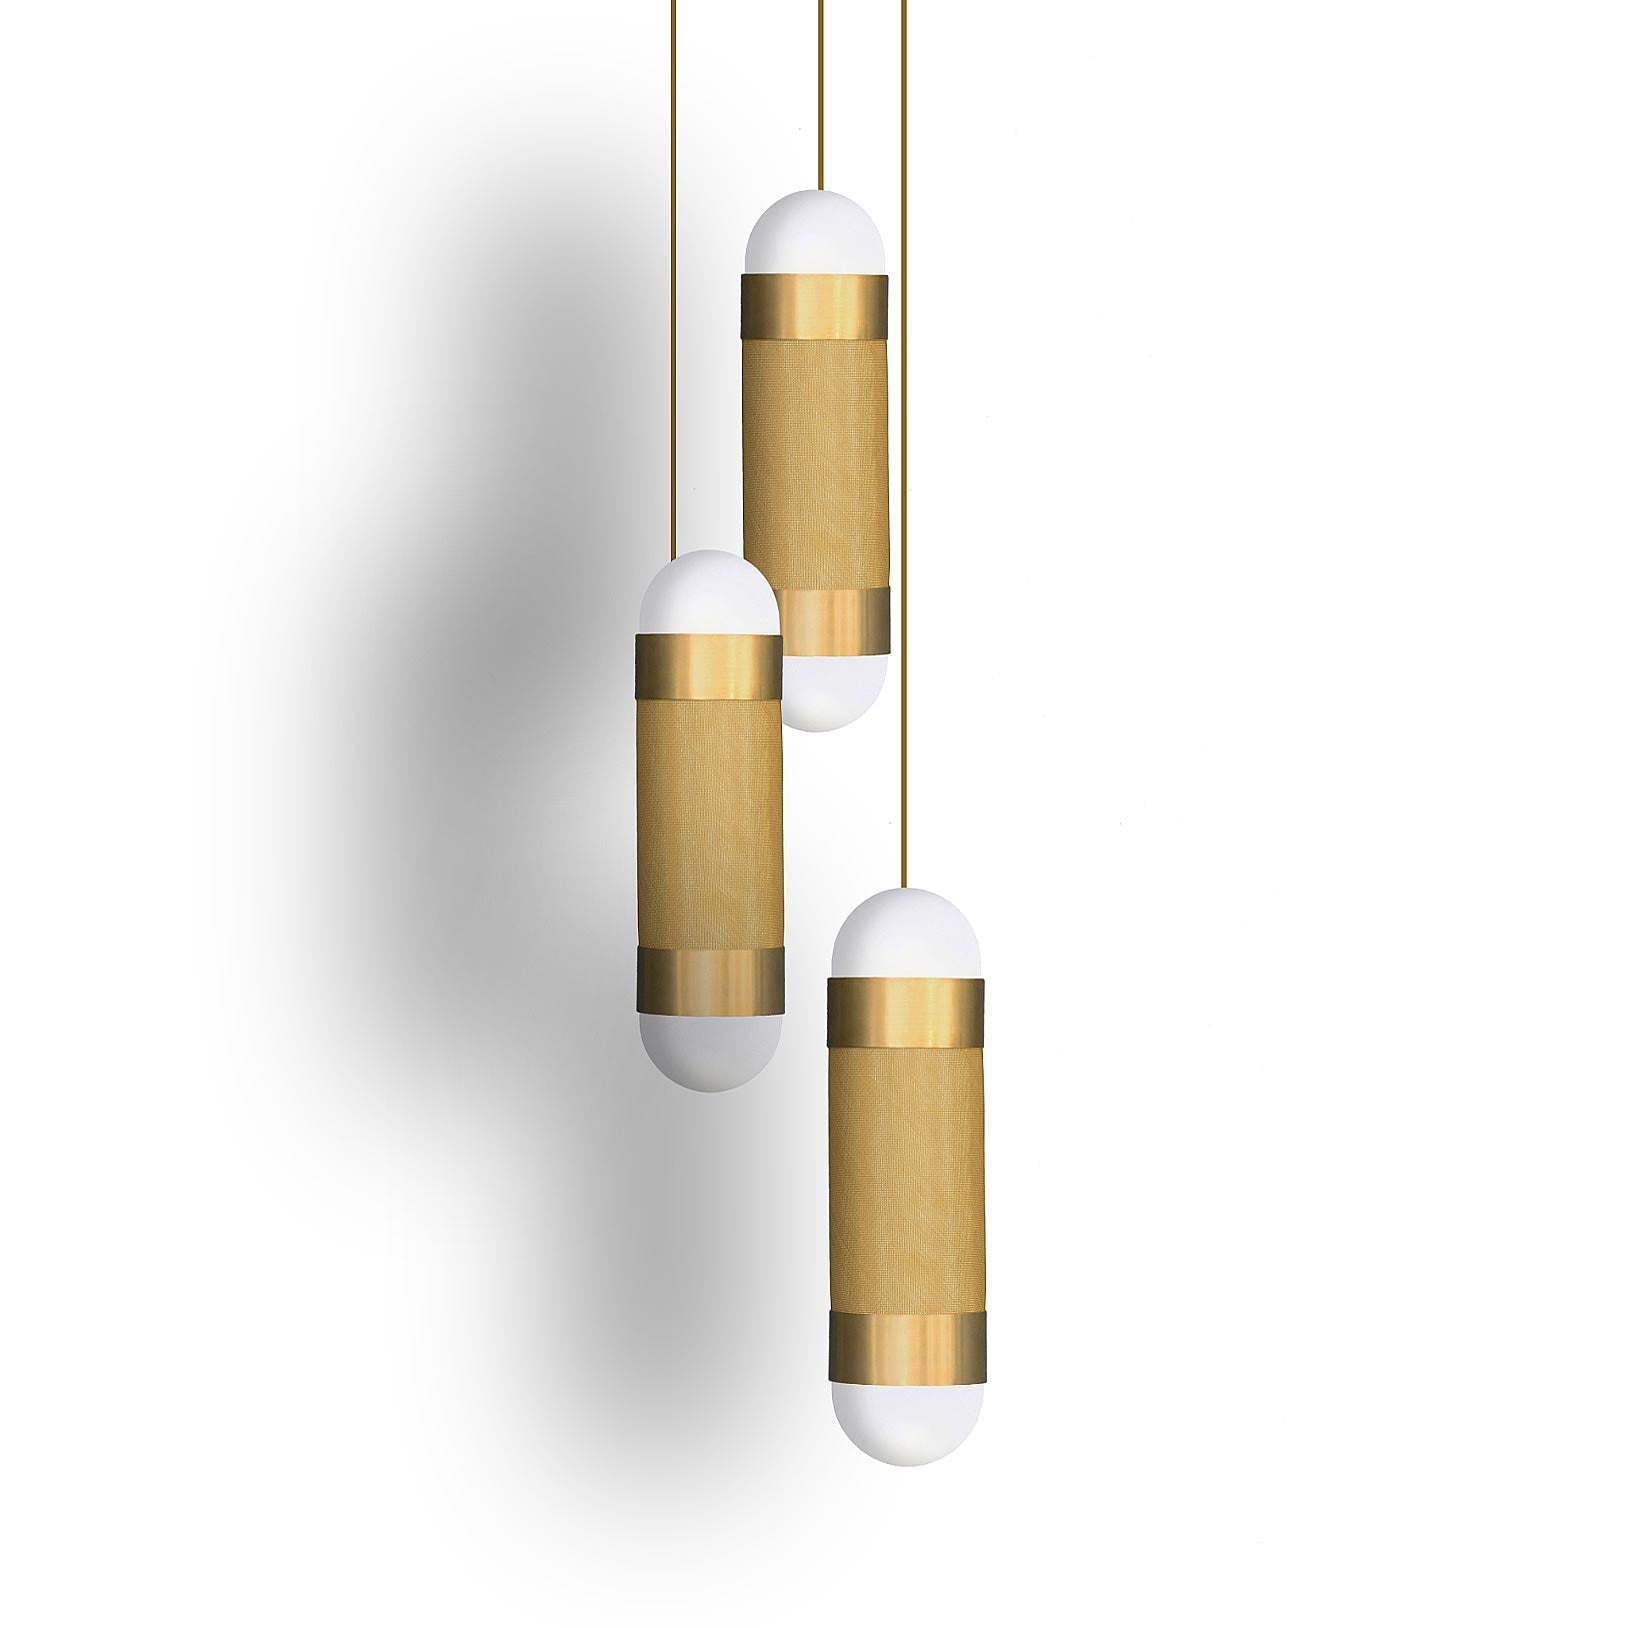 Luxury LOOM 3 Pendant Cascade Light in brass weave and brushed brass, supplied by Edinburgh-based South Charlotte Fine lighting